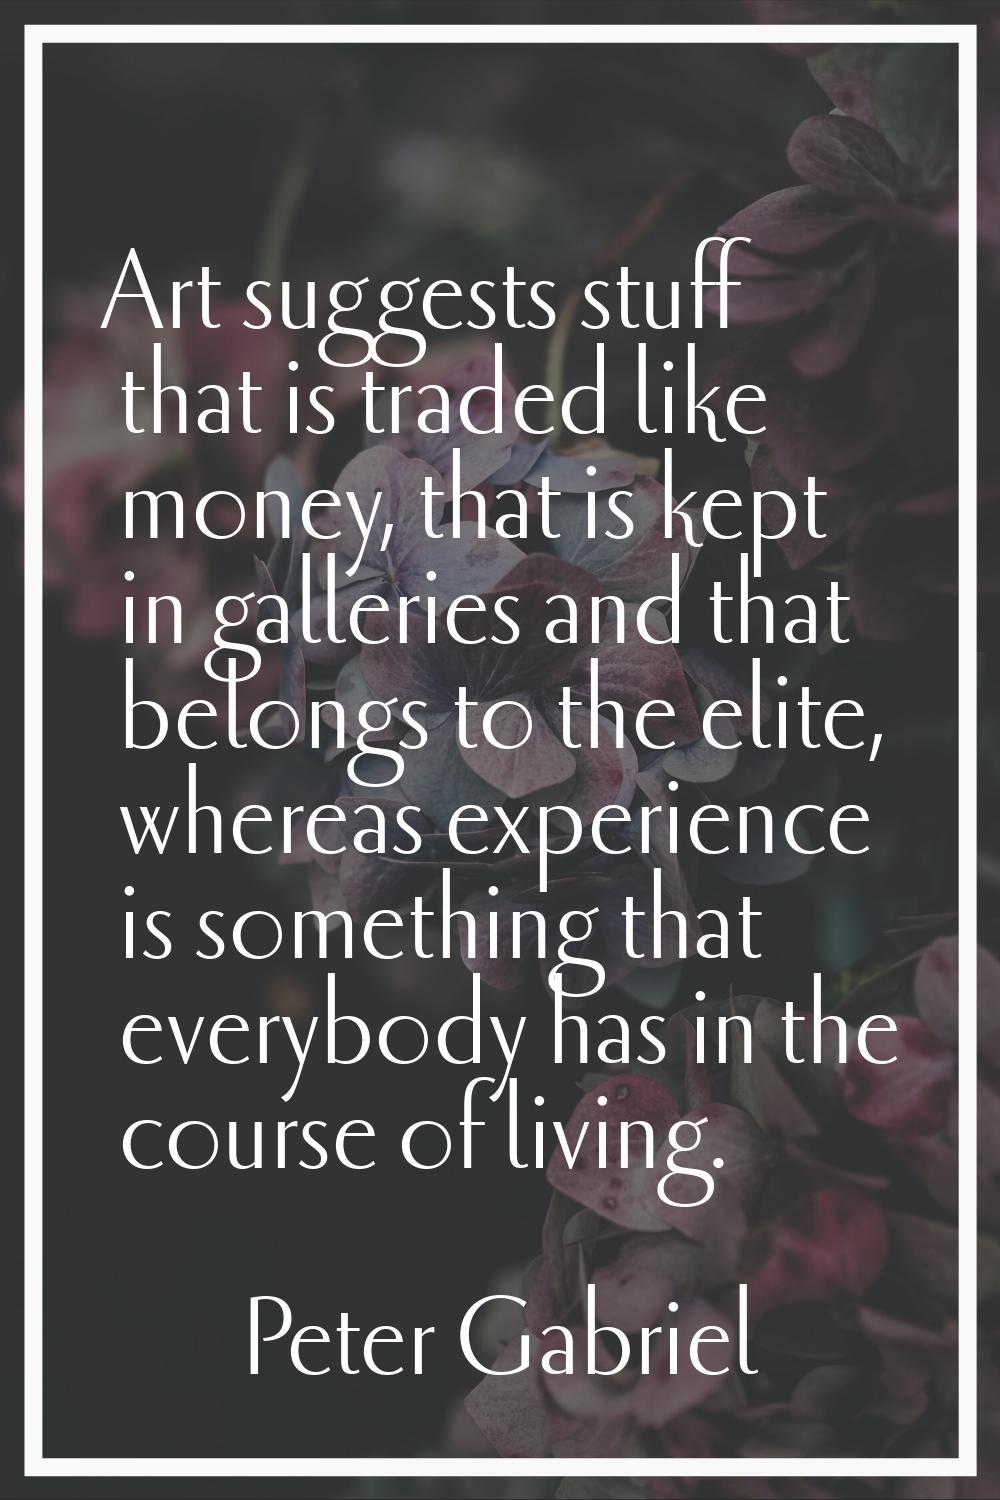 Art suggests stuff that is traded like money, that is kept in galleries and that belongs to the eli